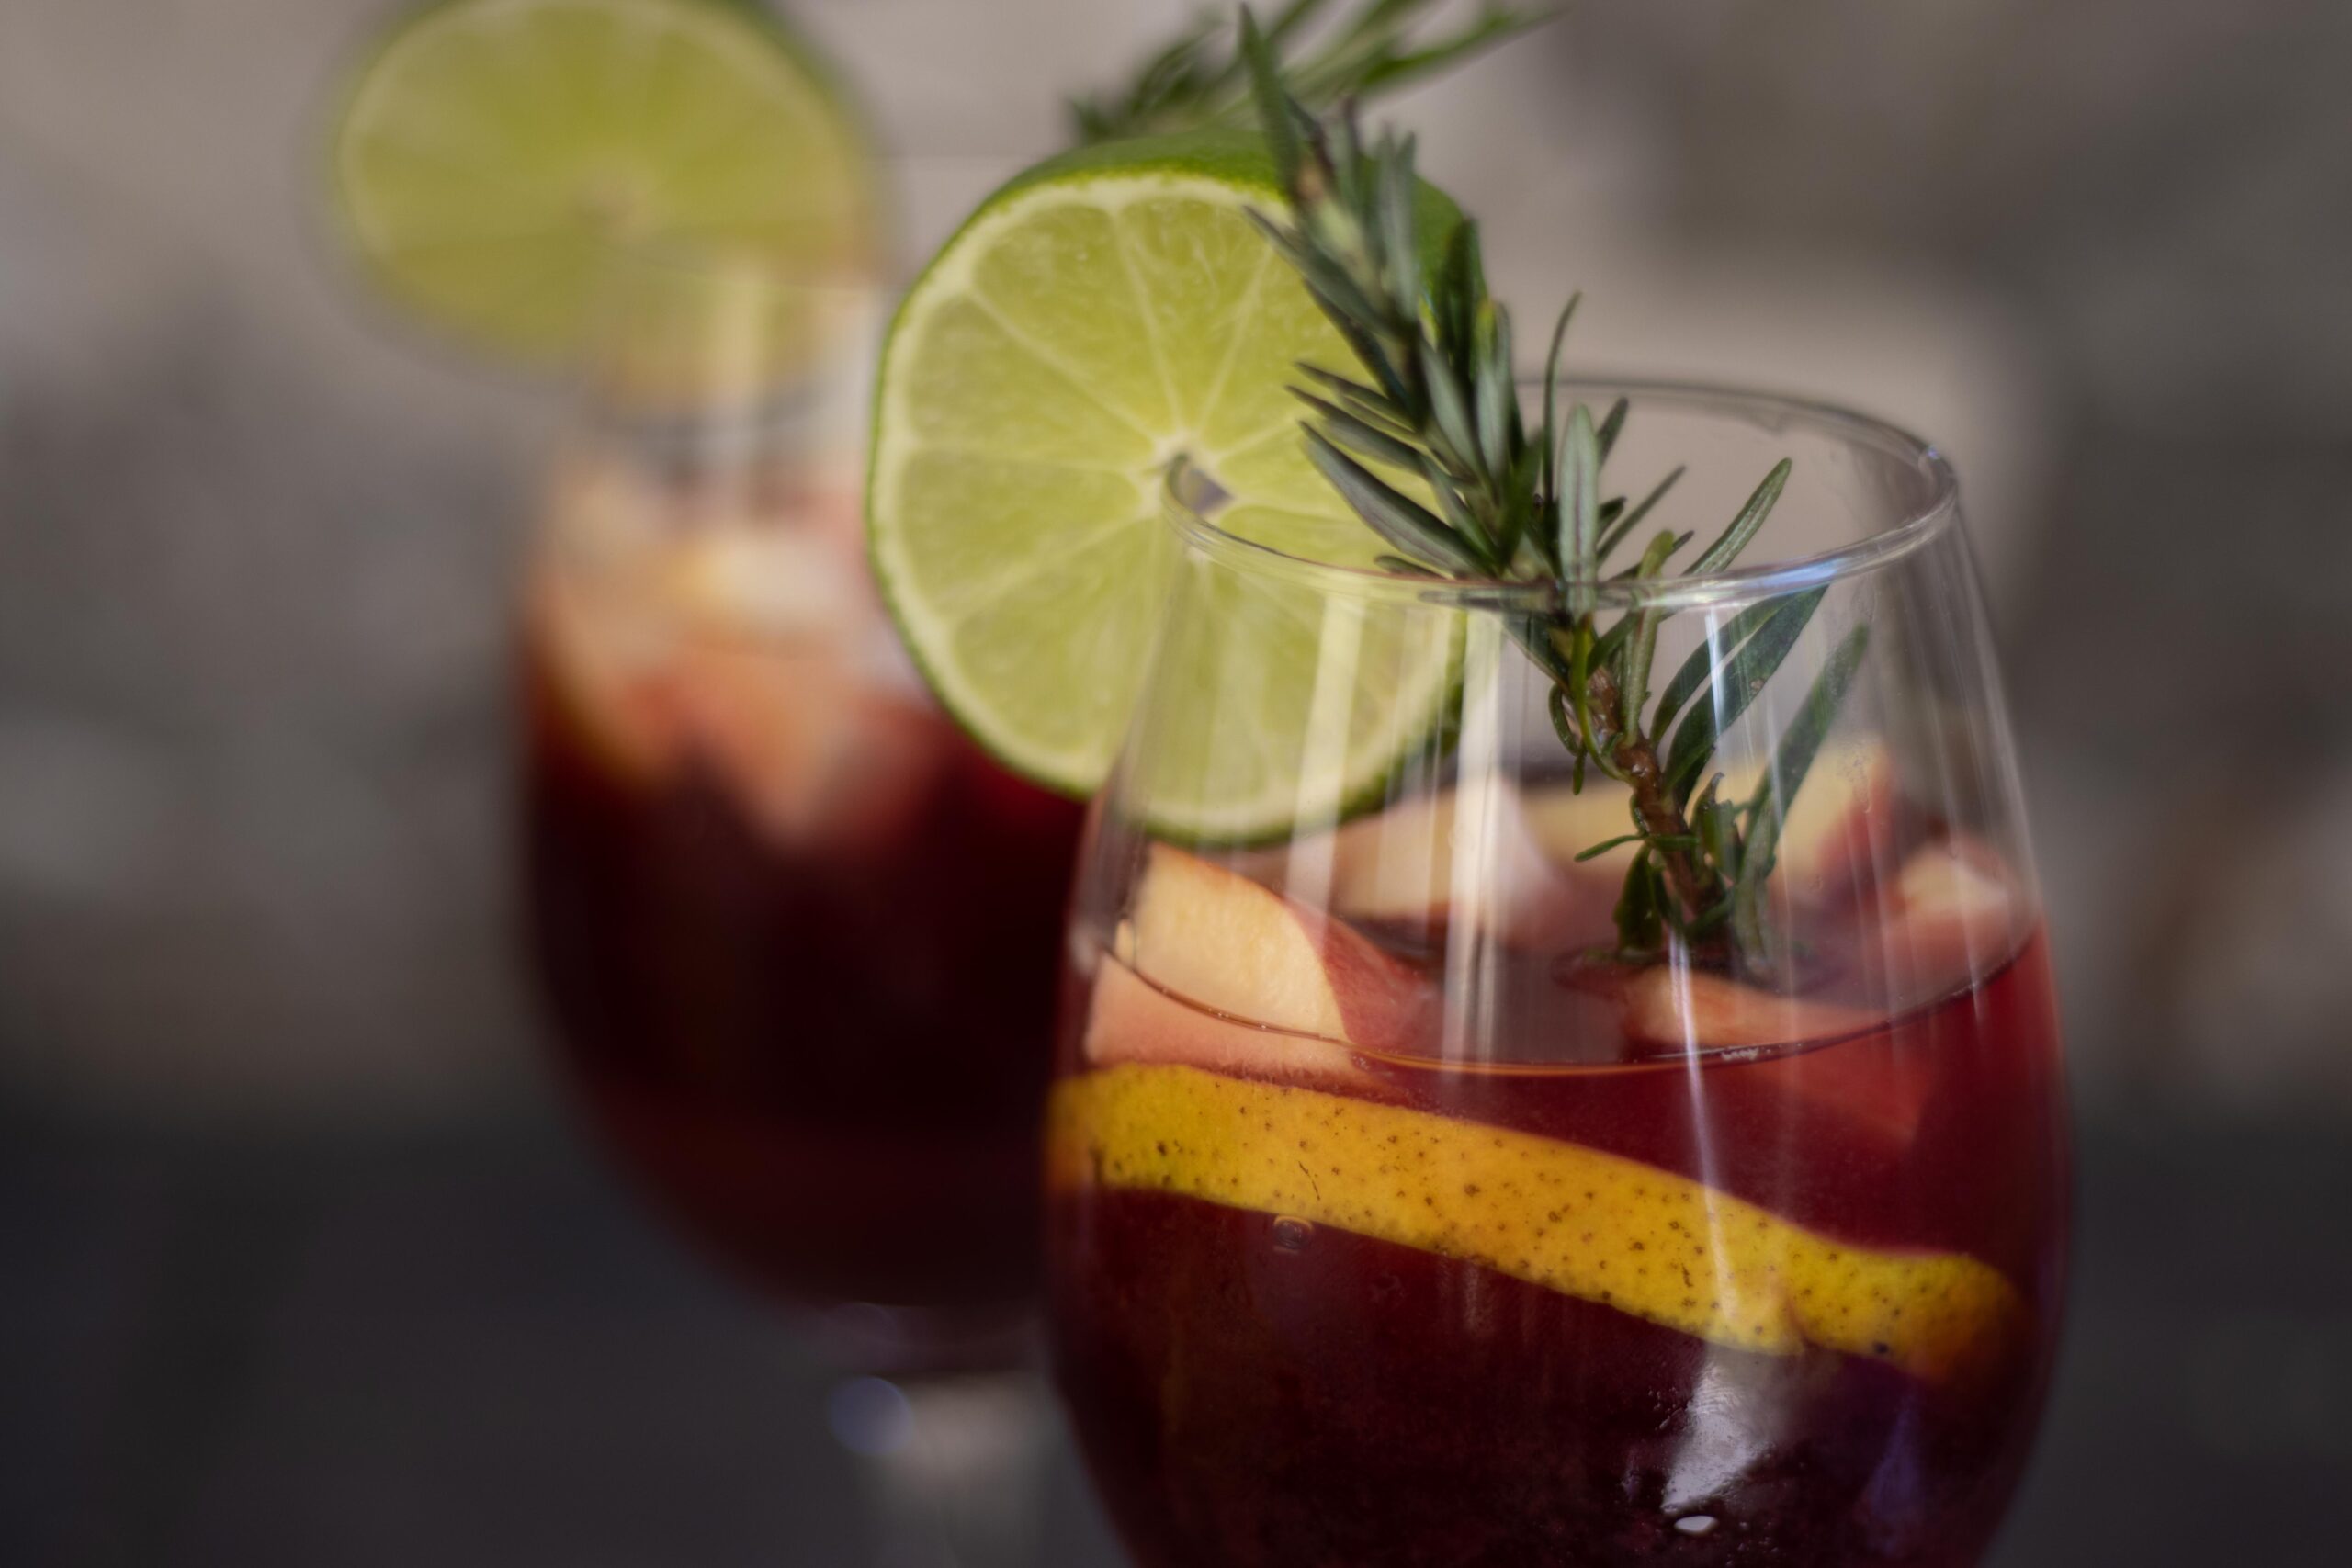 Sip on a sangria and make this Halloween potluck idea. Pictured: A Sangria.